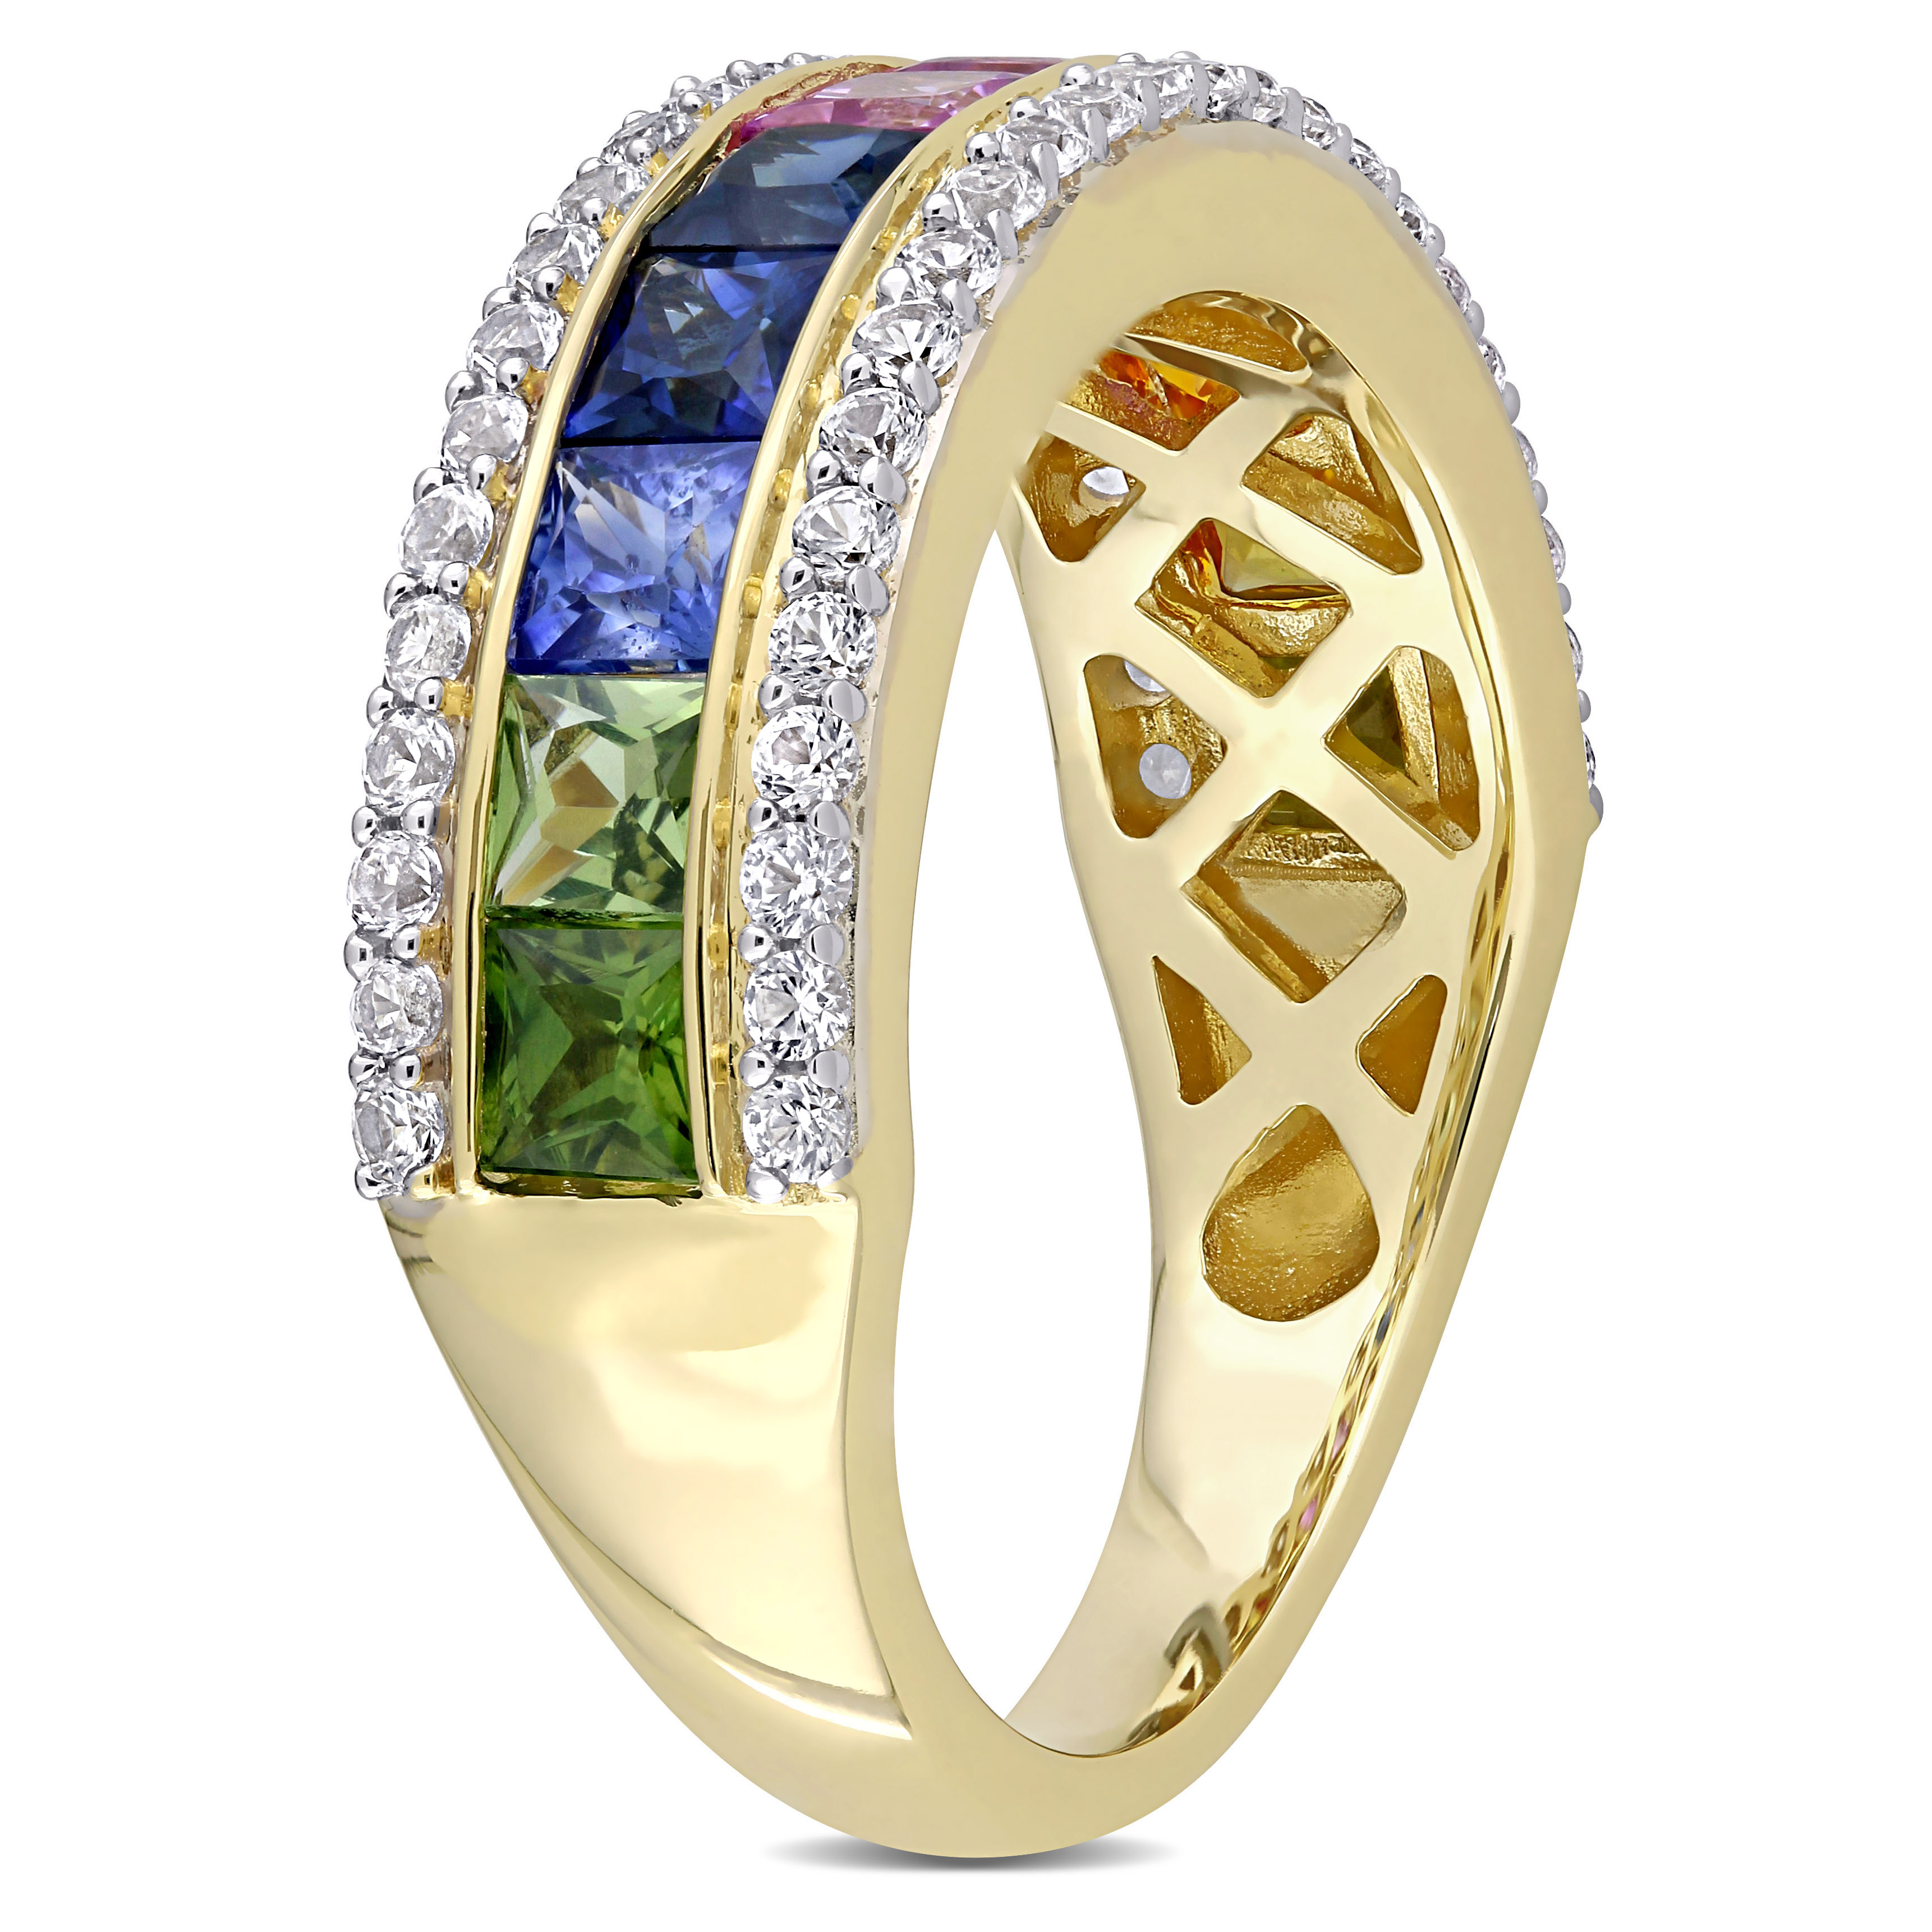 3 CT TGW Multi-Color Square Sapphire Ring in 14k Yellow Gold